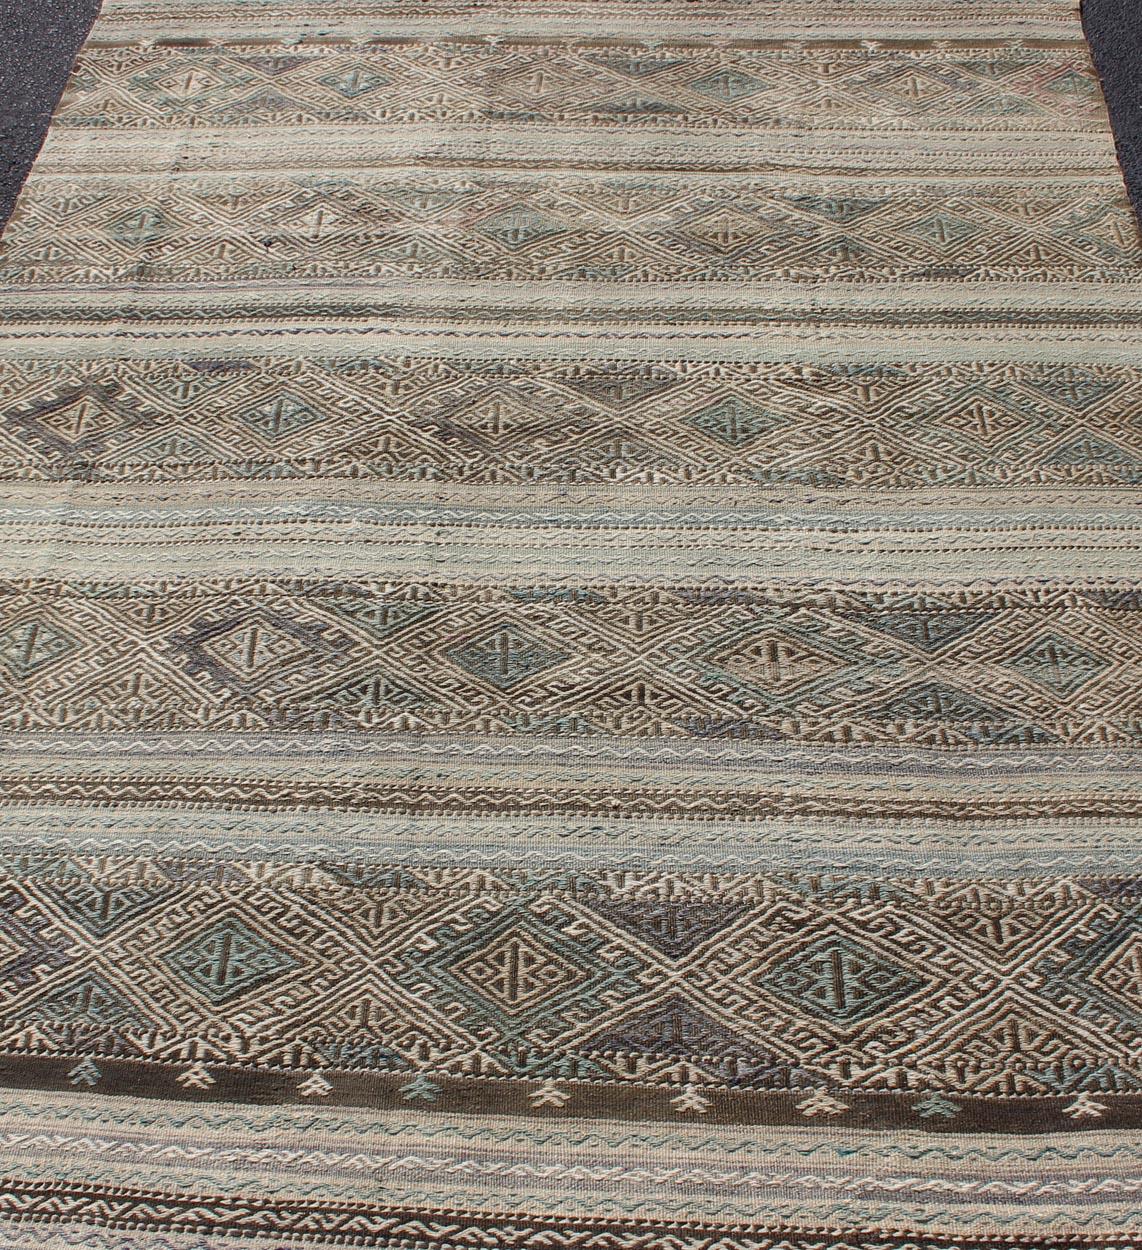 Flat-Weave Embroideries Kilim in Taupe, Green, Teal, Blue and Brown In Good Condition For Sale In Atlanta, GA